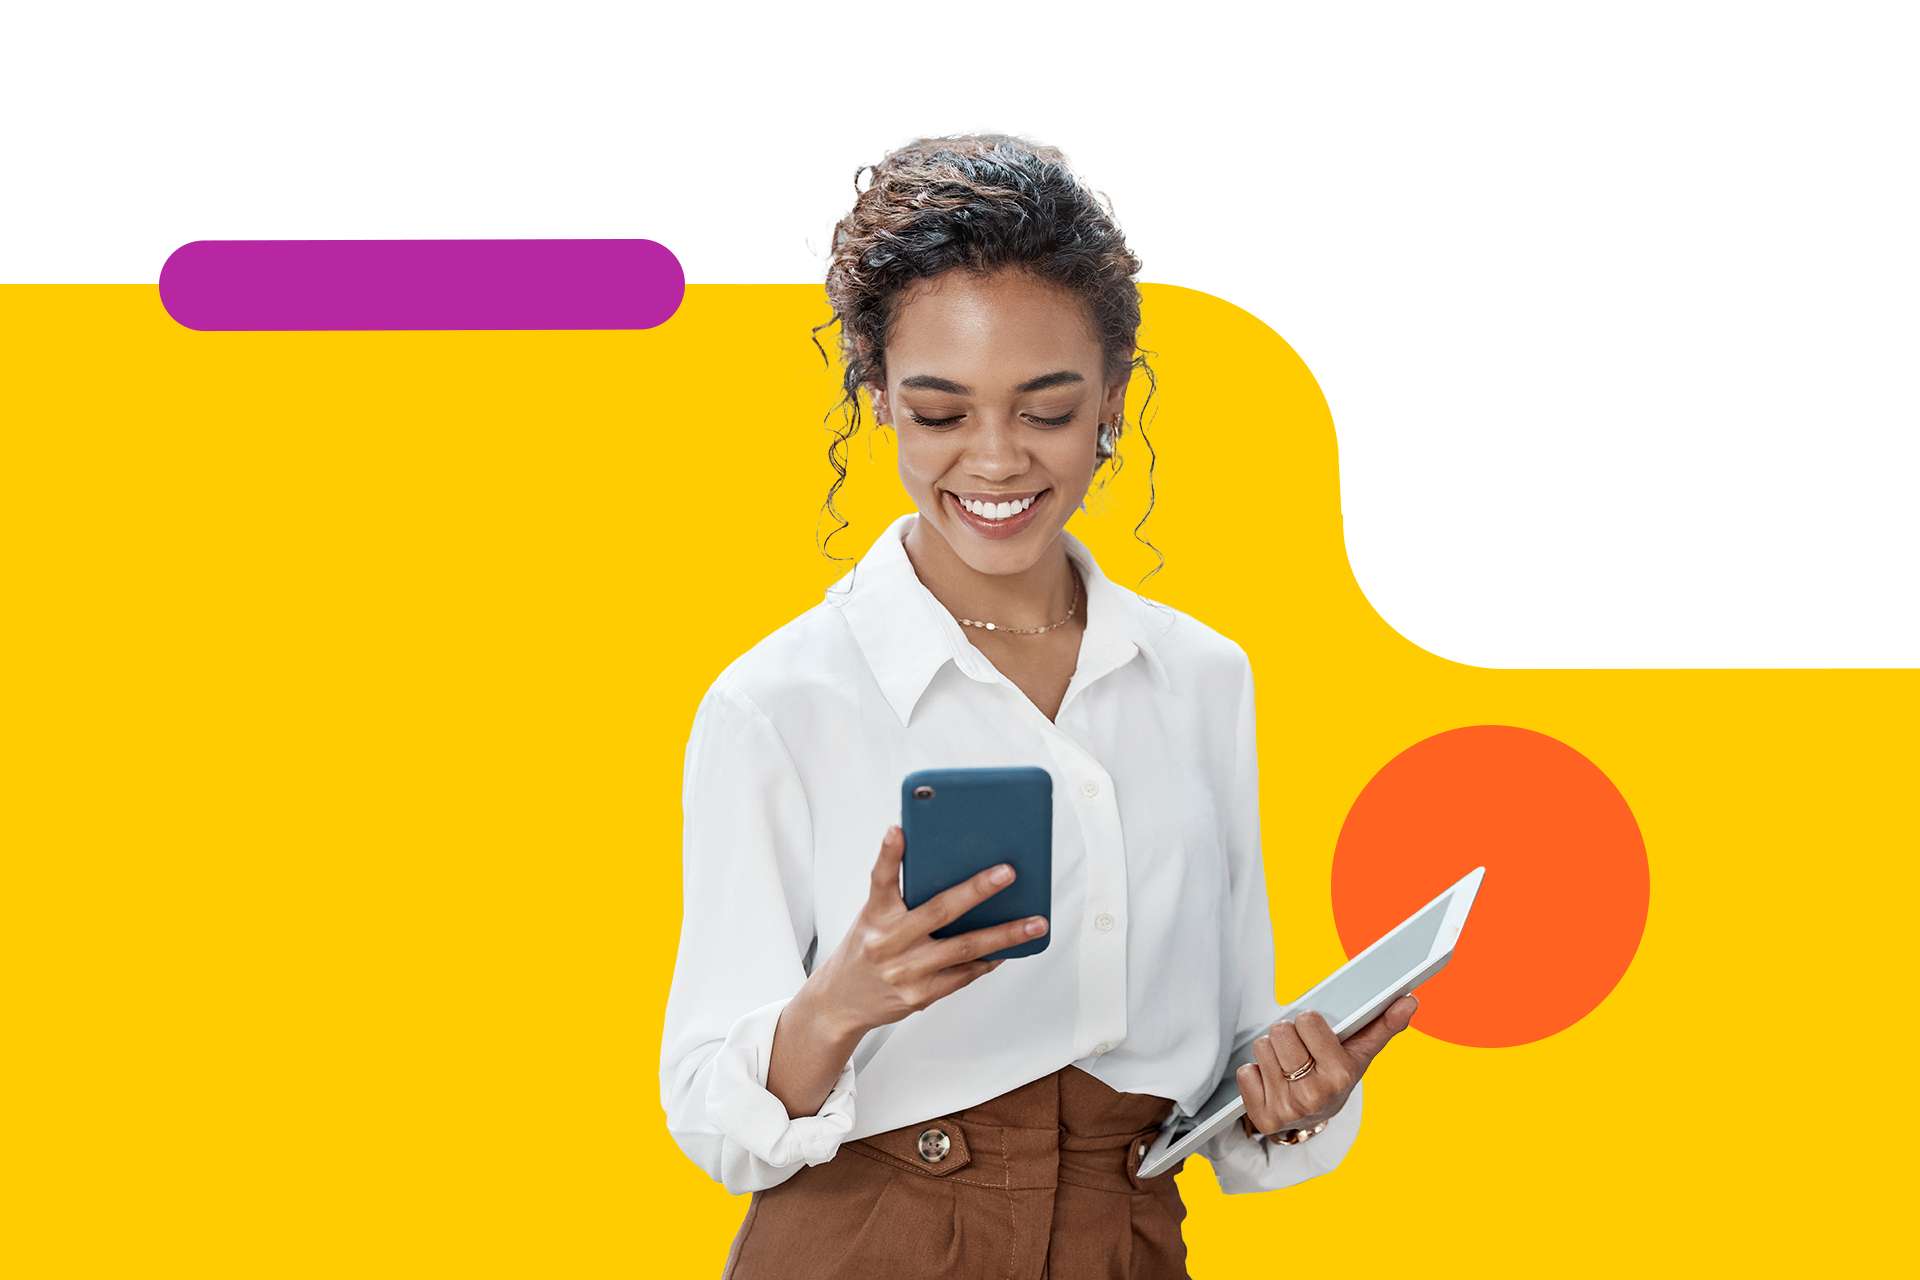 Ultimate guide to social media management. Image showing a social media manager holding a phone and a tablet in front of an abstract yellow background